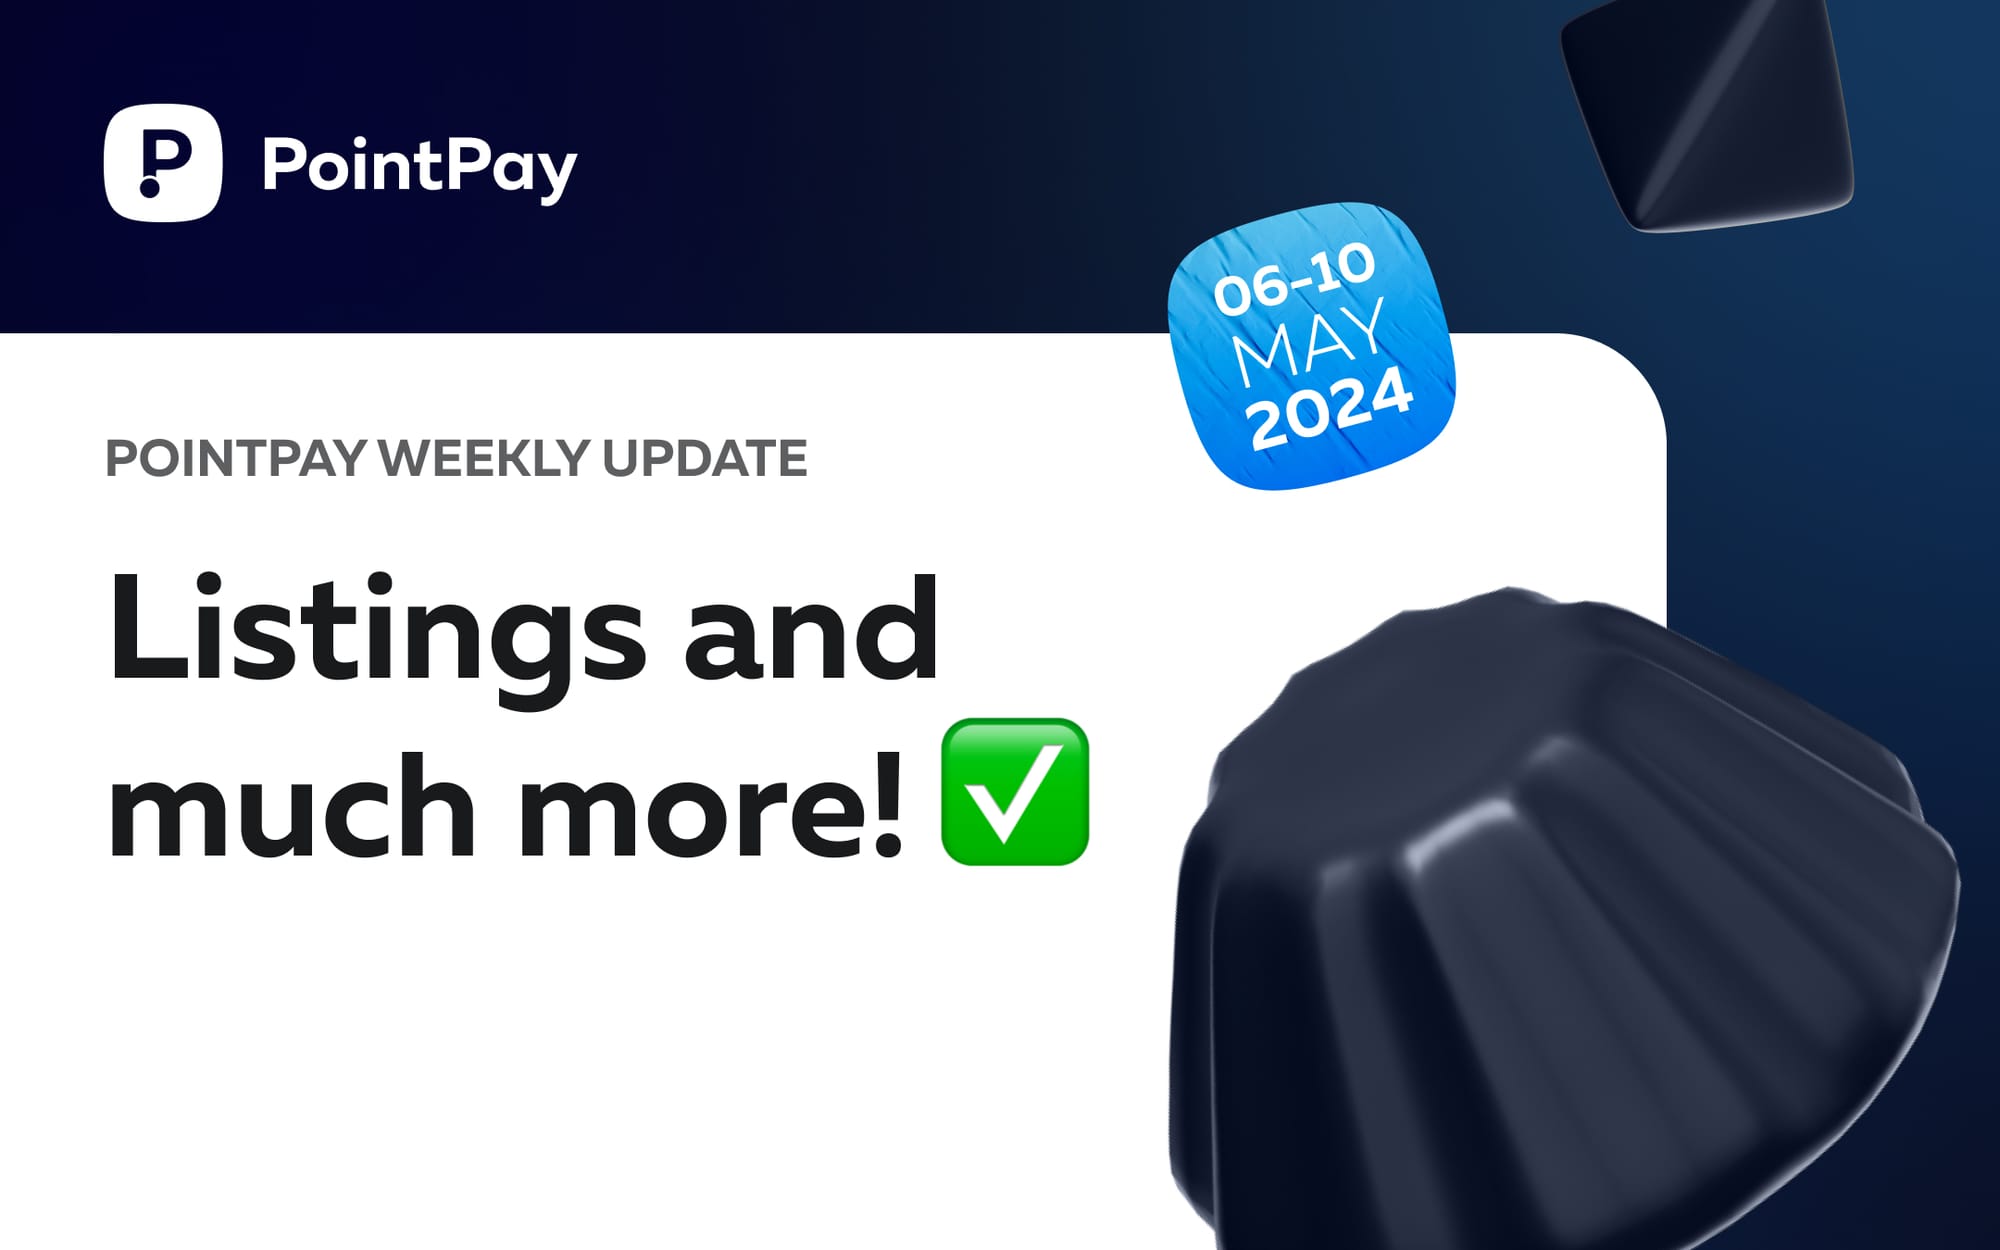 PointPay Weekly Update (6 - 10 May)